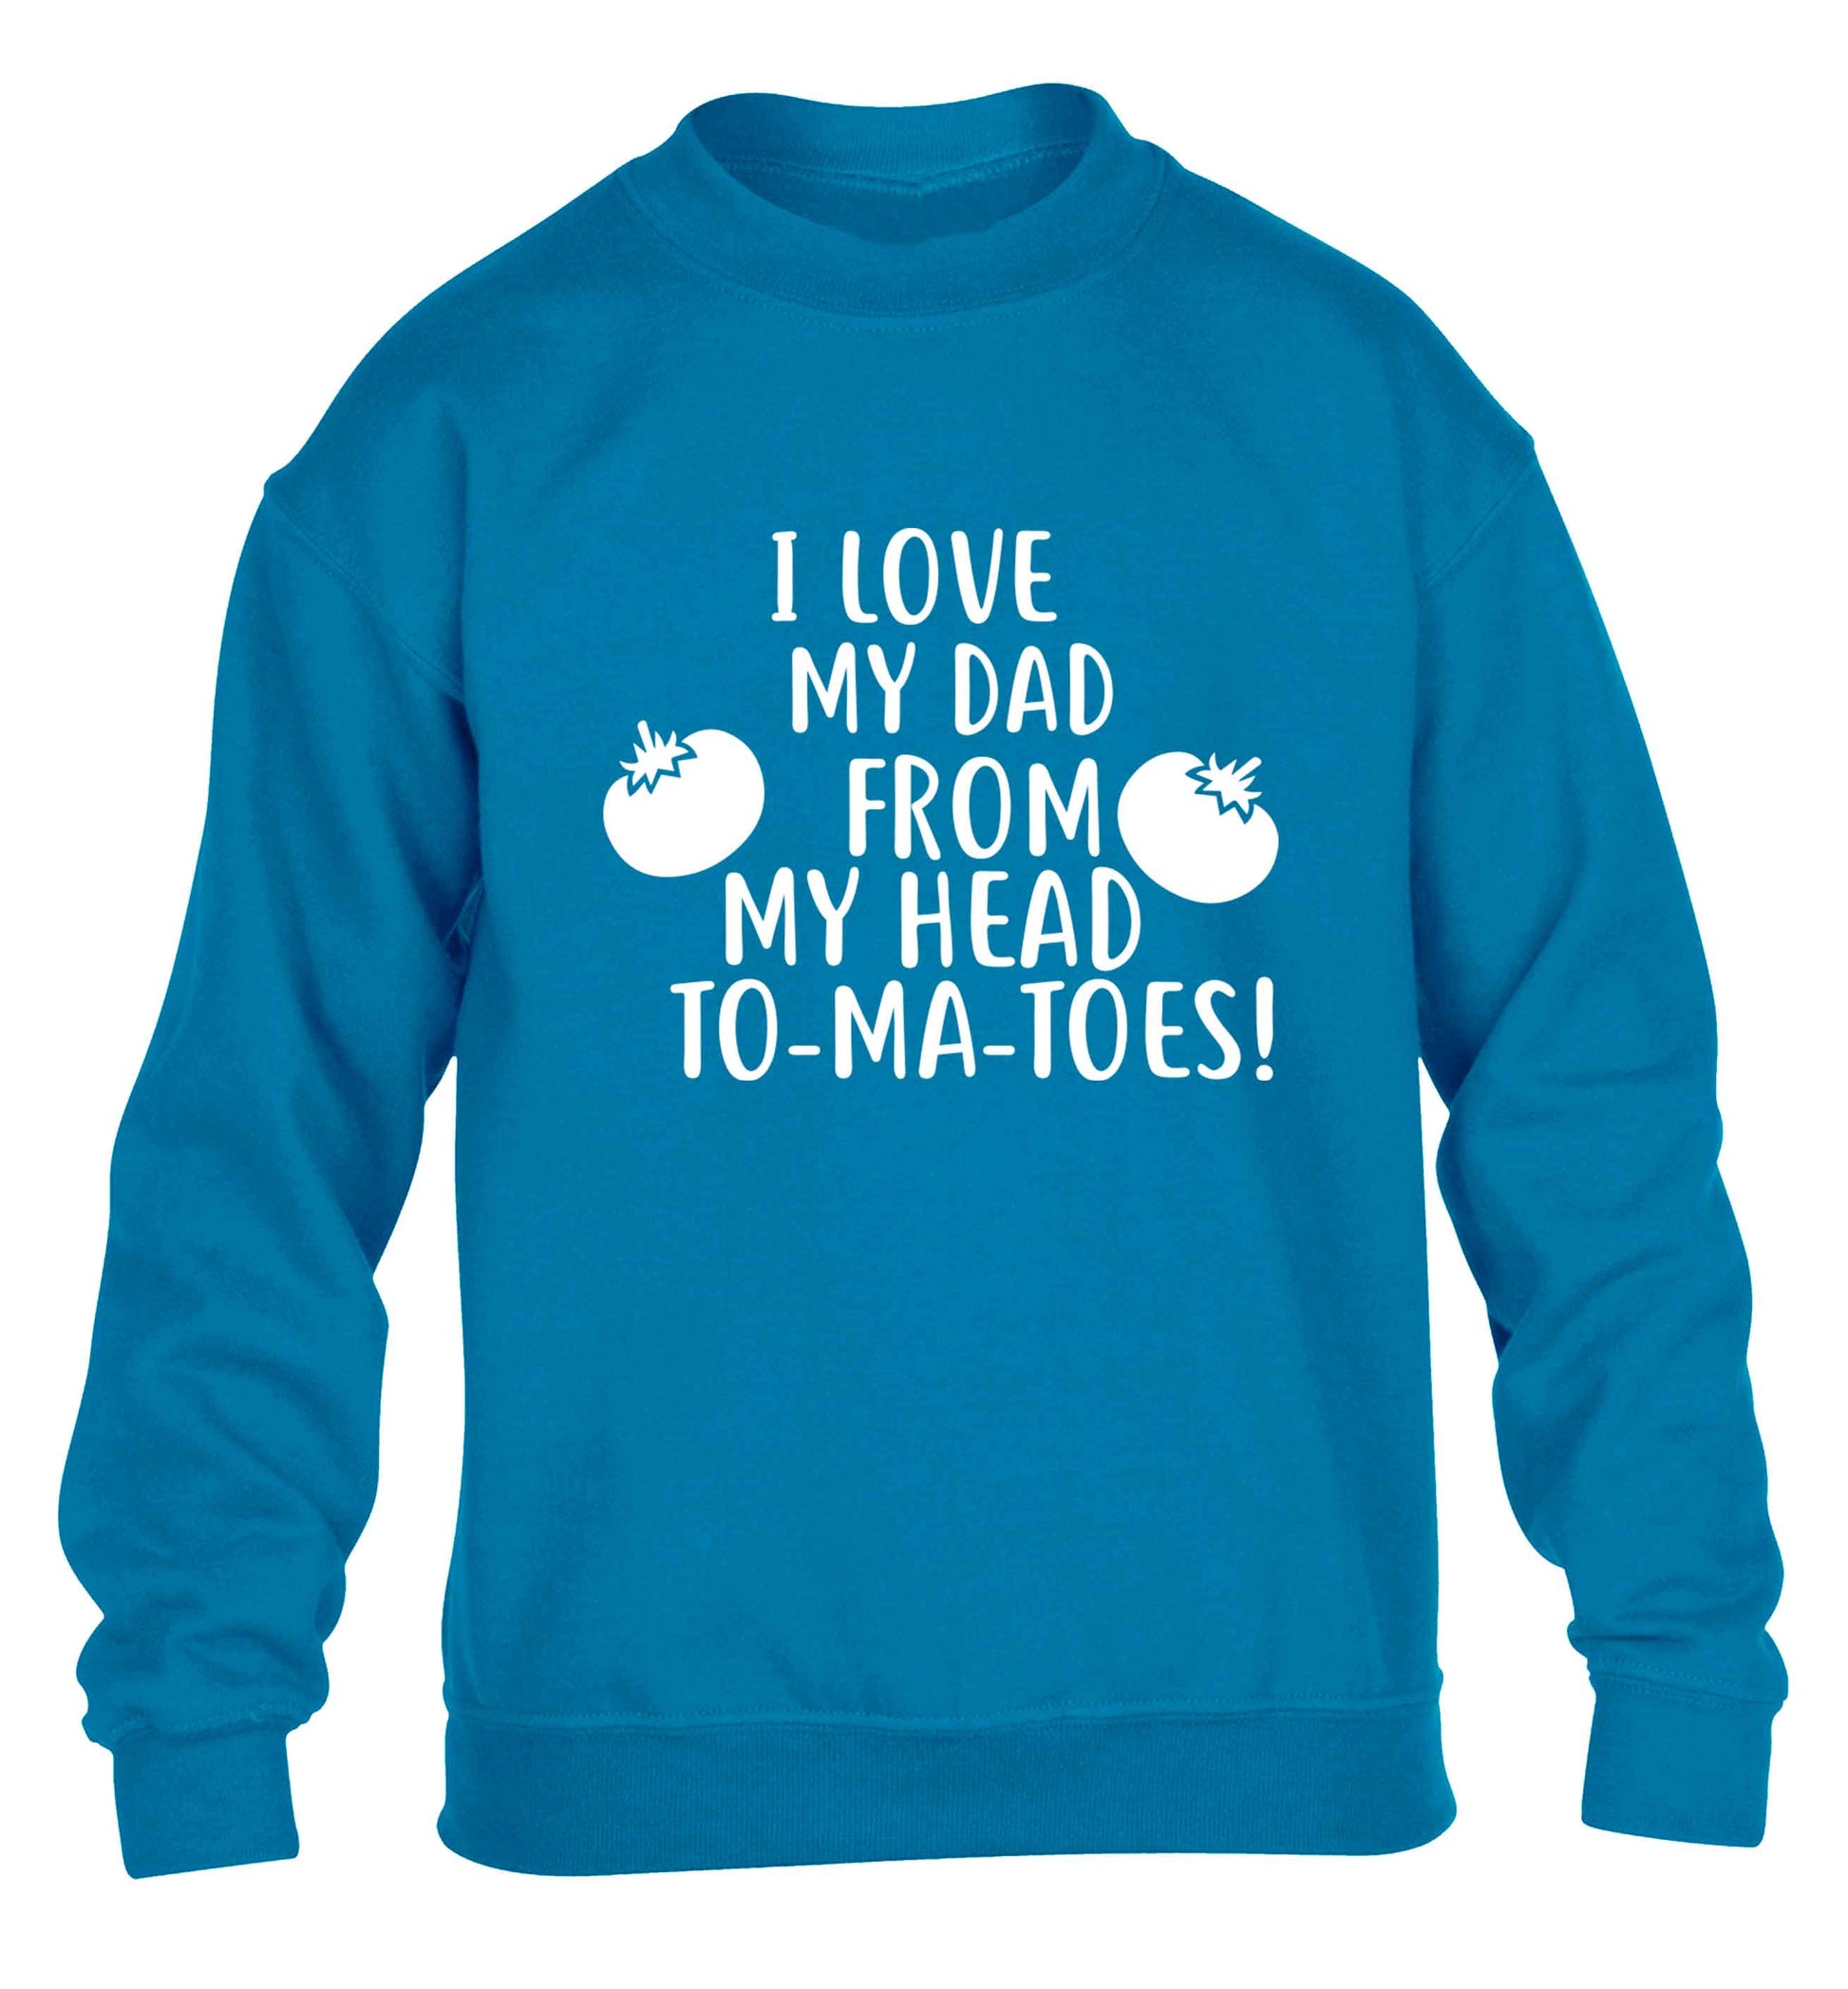 I love my dad from my head to-ma-toes children's blue sweater 12-13 Years